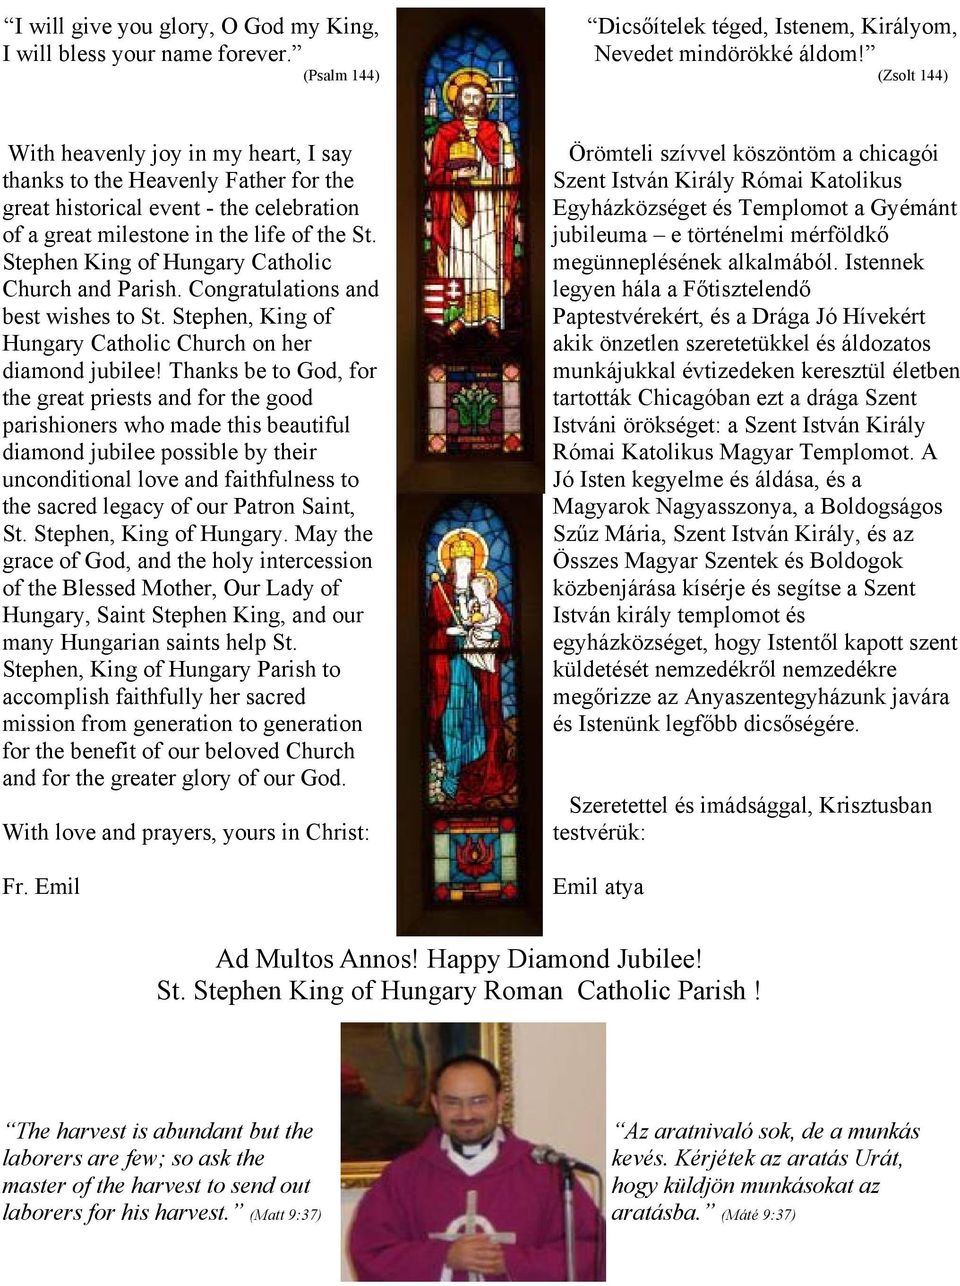 Stephen King of Hungary Catholic Church and Parish. Congratulations and best wishes to St. Stephen, King of Hungary Catholic Church on her diamond jubilee!